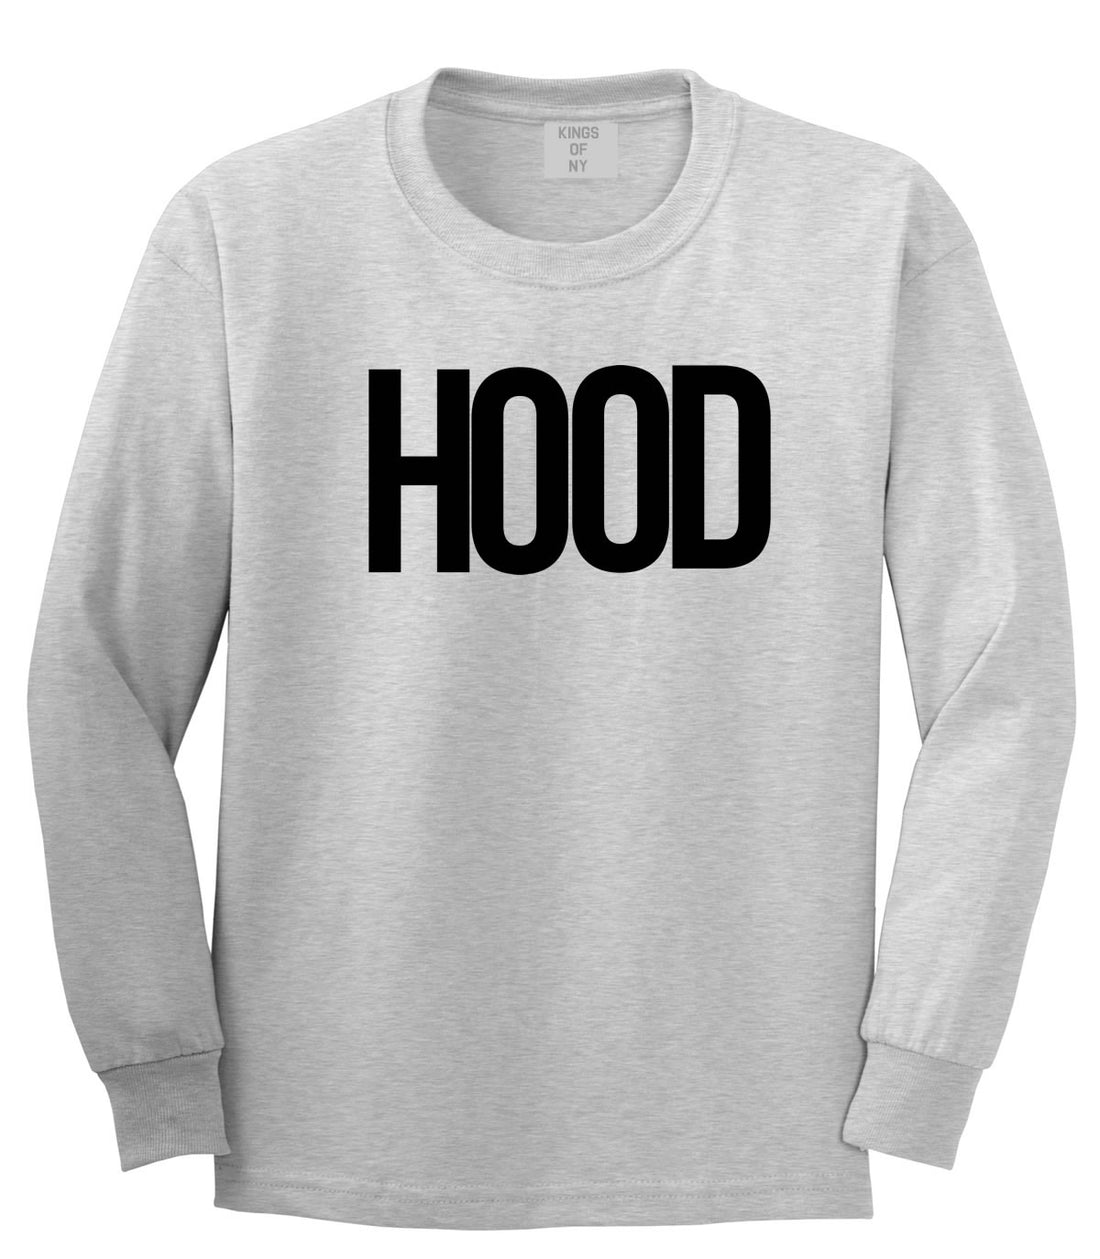 Hood Trap Style Compton New York Air Long Sleeve T-Shirt In Grey by Kings Of NY